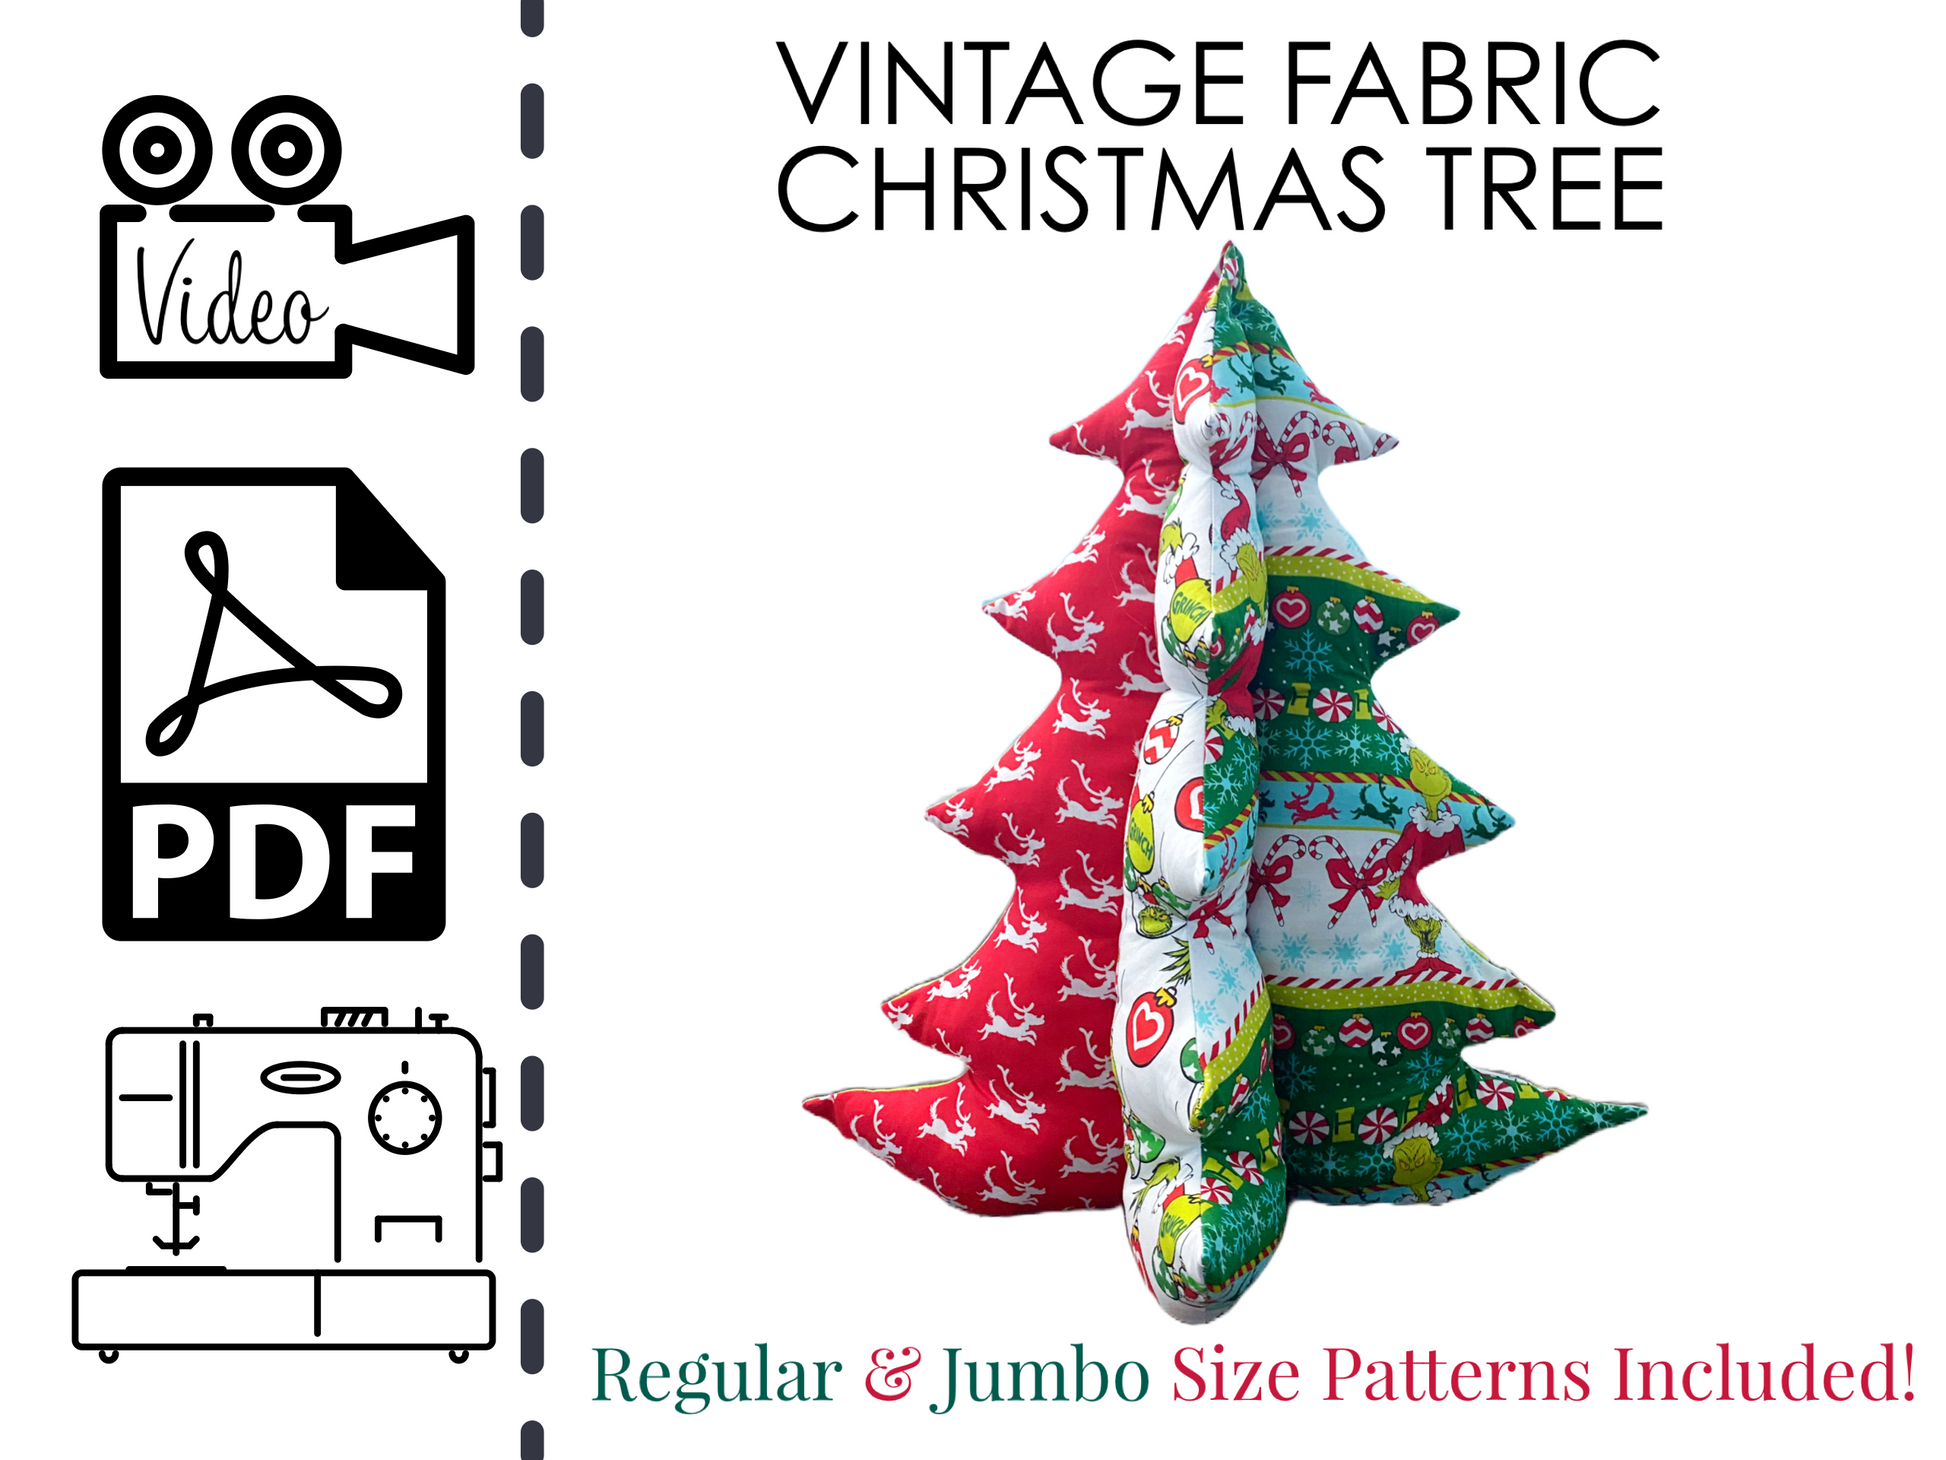 Plush fabric christmas tree sewing pattern and video tutorial. Printable pdf sewing pattern for christmas sewing projects. Stuffed Christmas Tree Pillow or Table Decor and decoration. easy beginners christmas gifts to sew. 